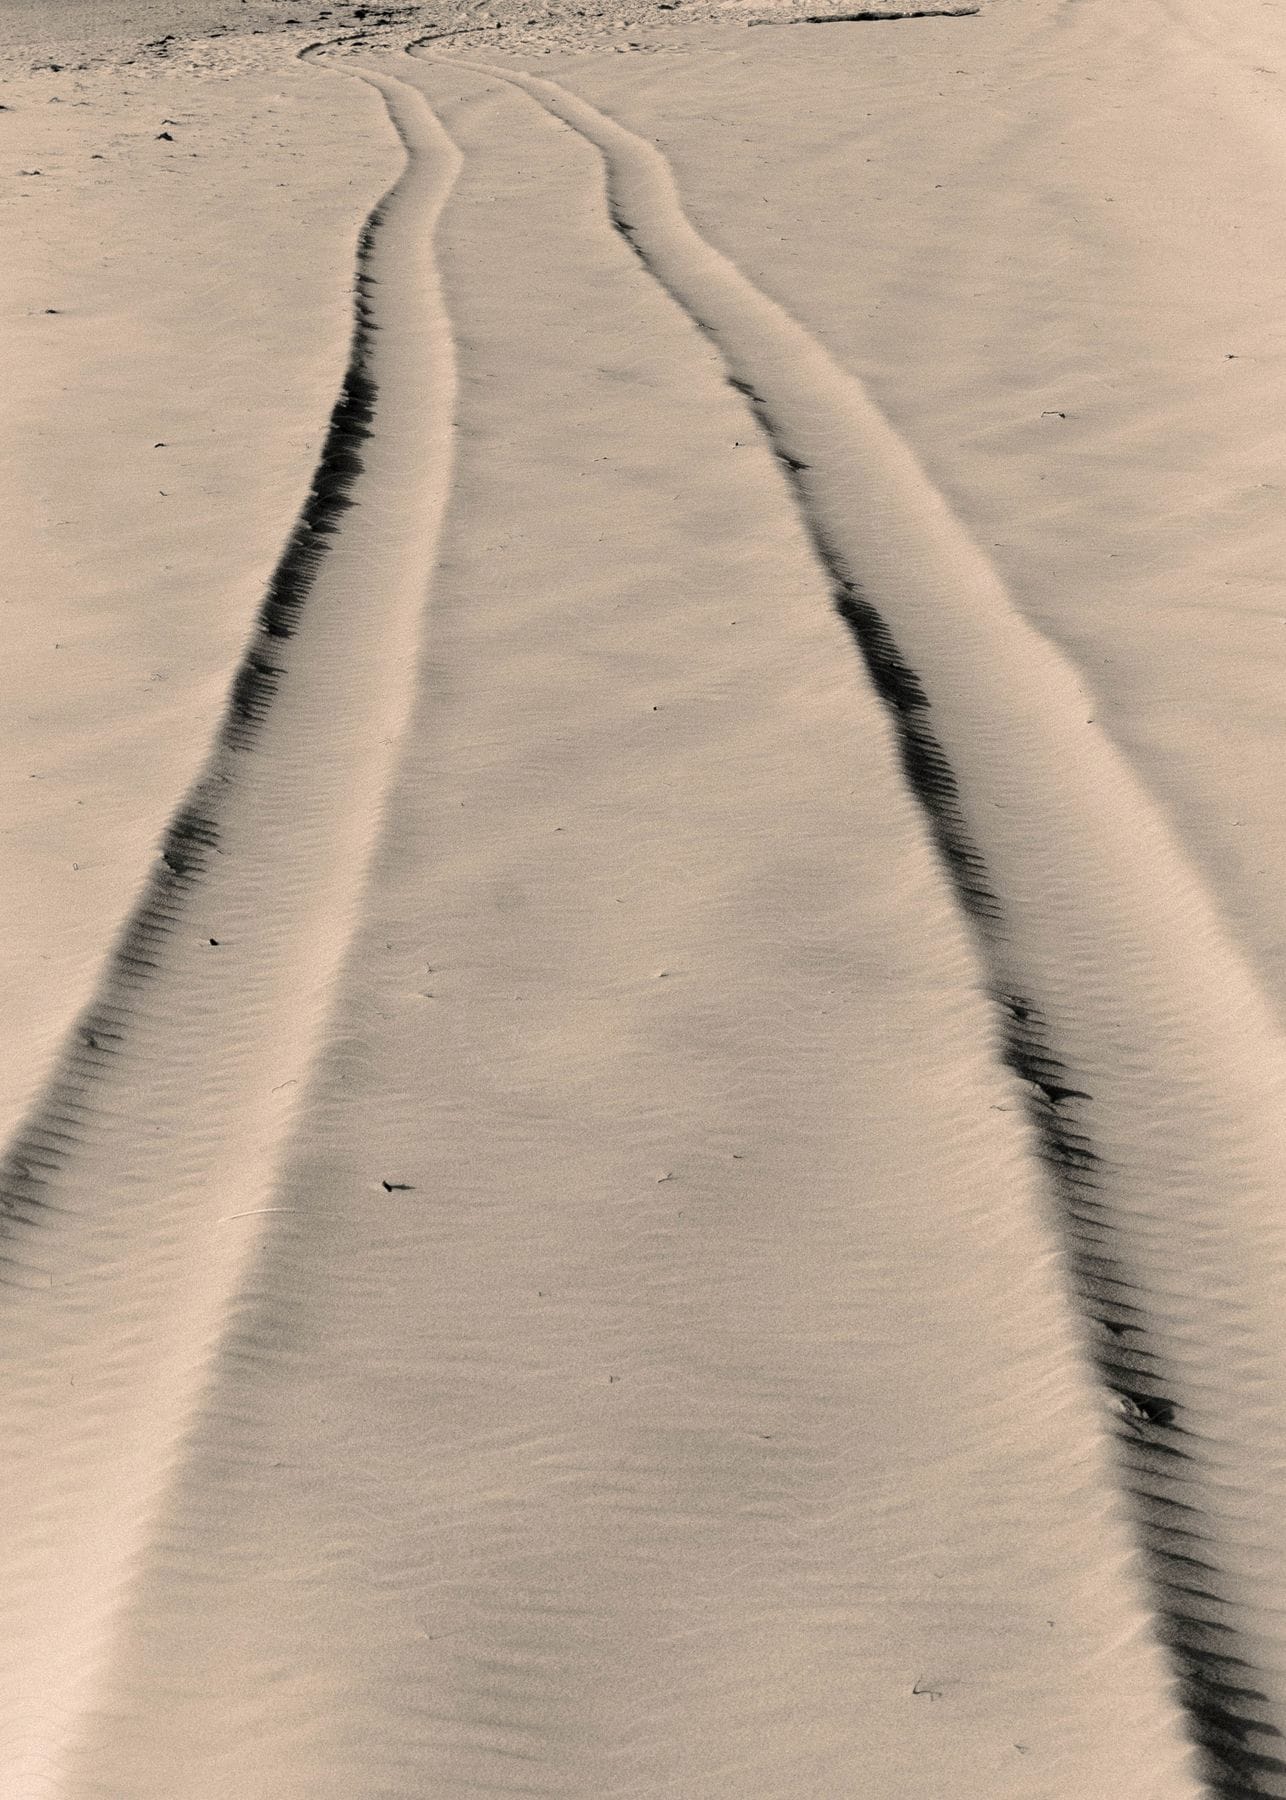 Twin tire marks etch across the sandy expanse.